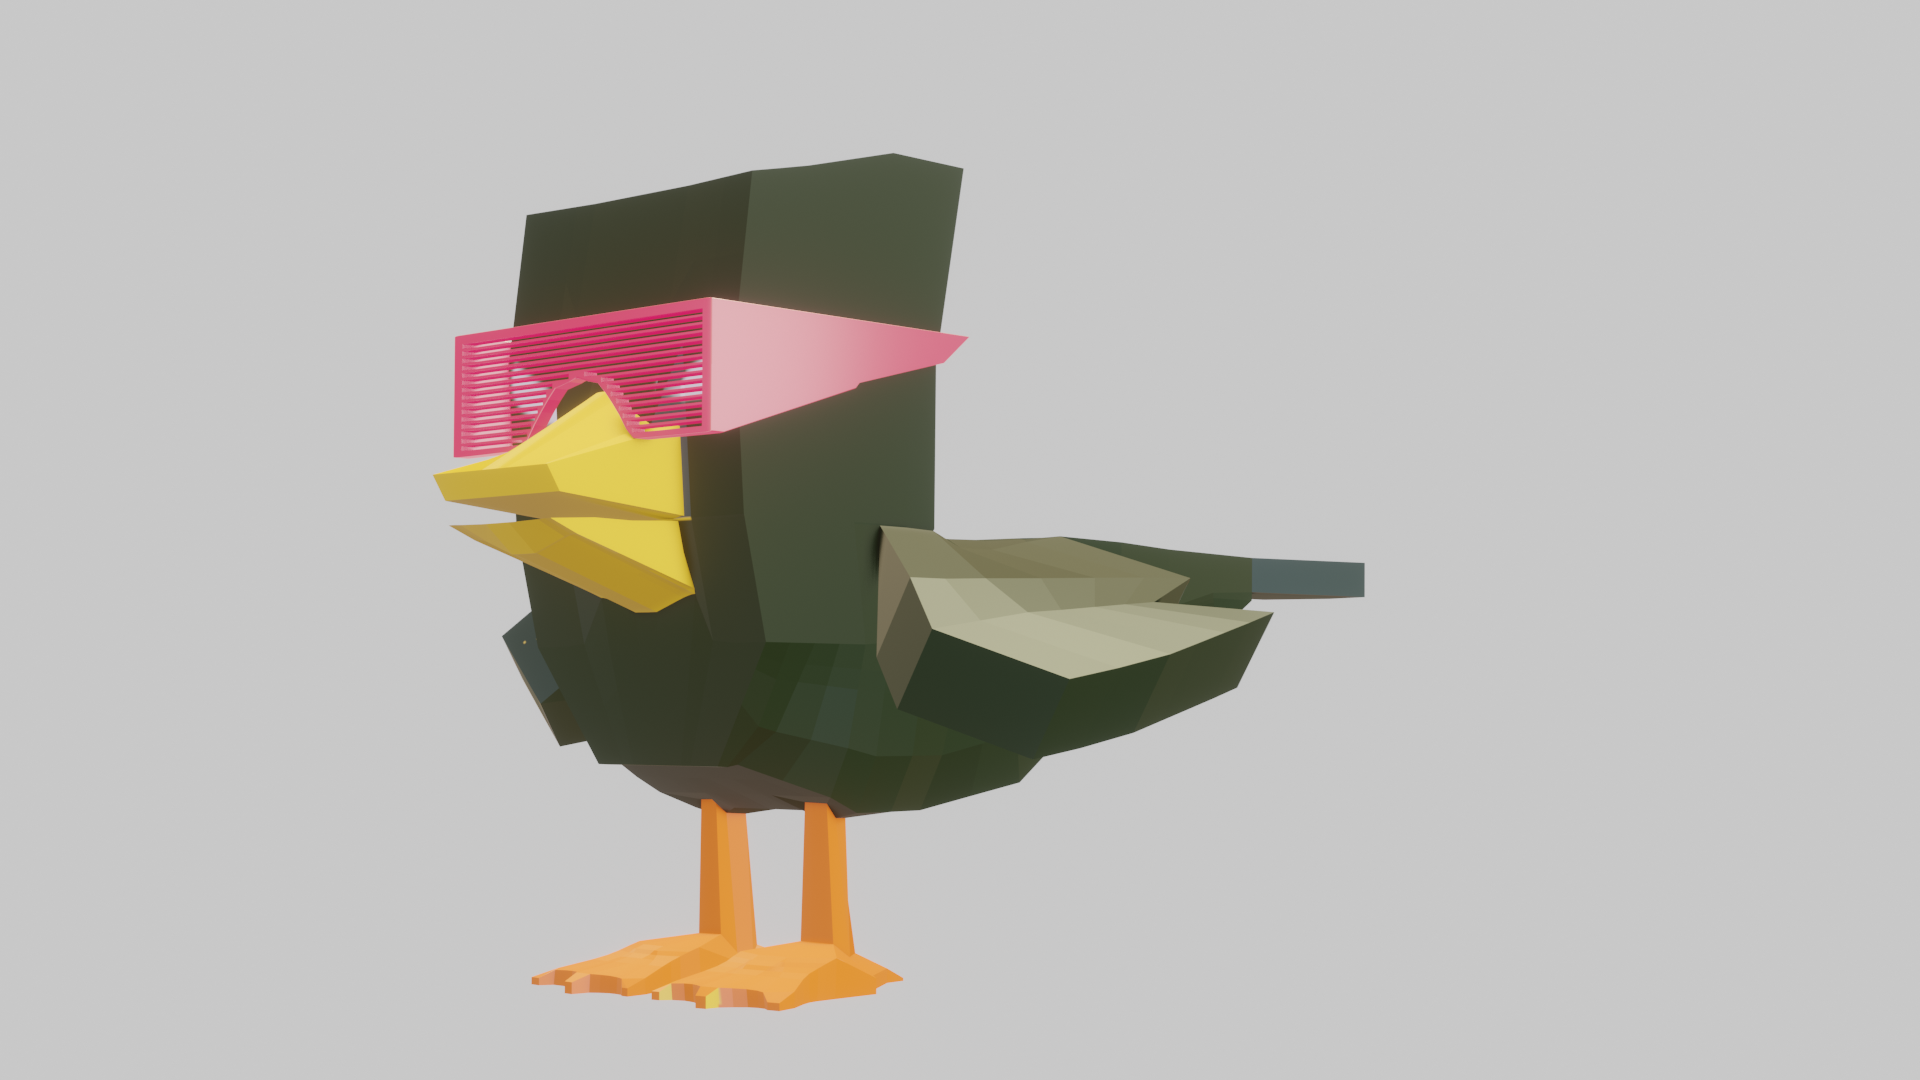 a duck with cyberpunk glasses